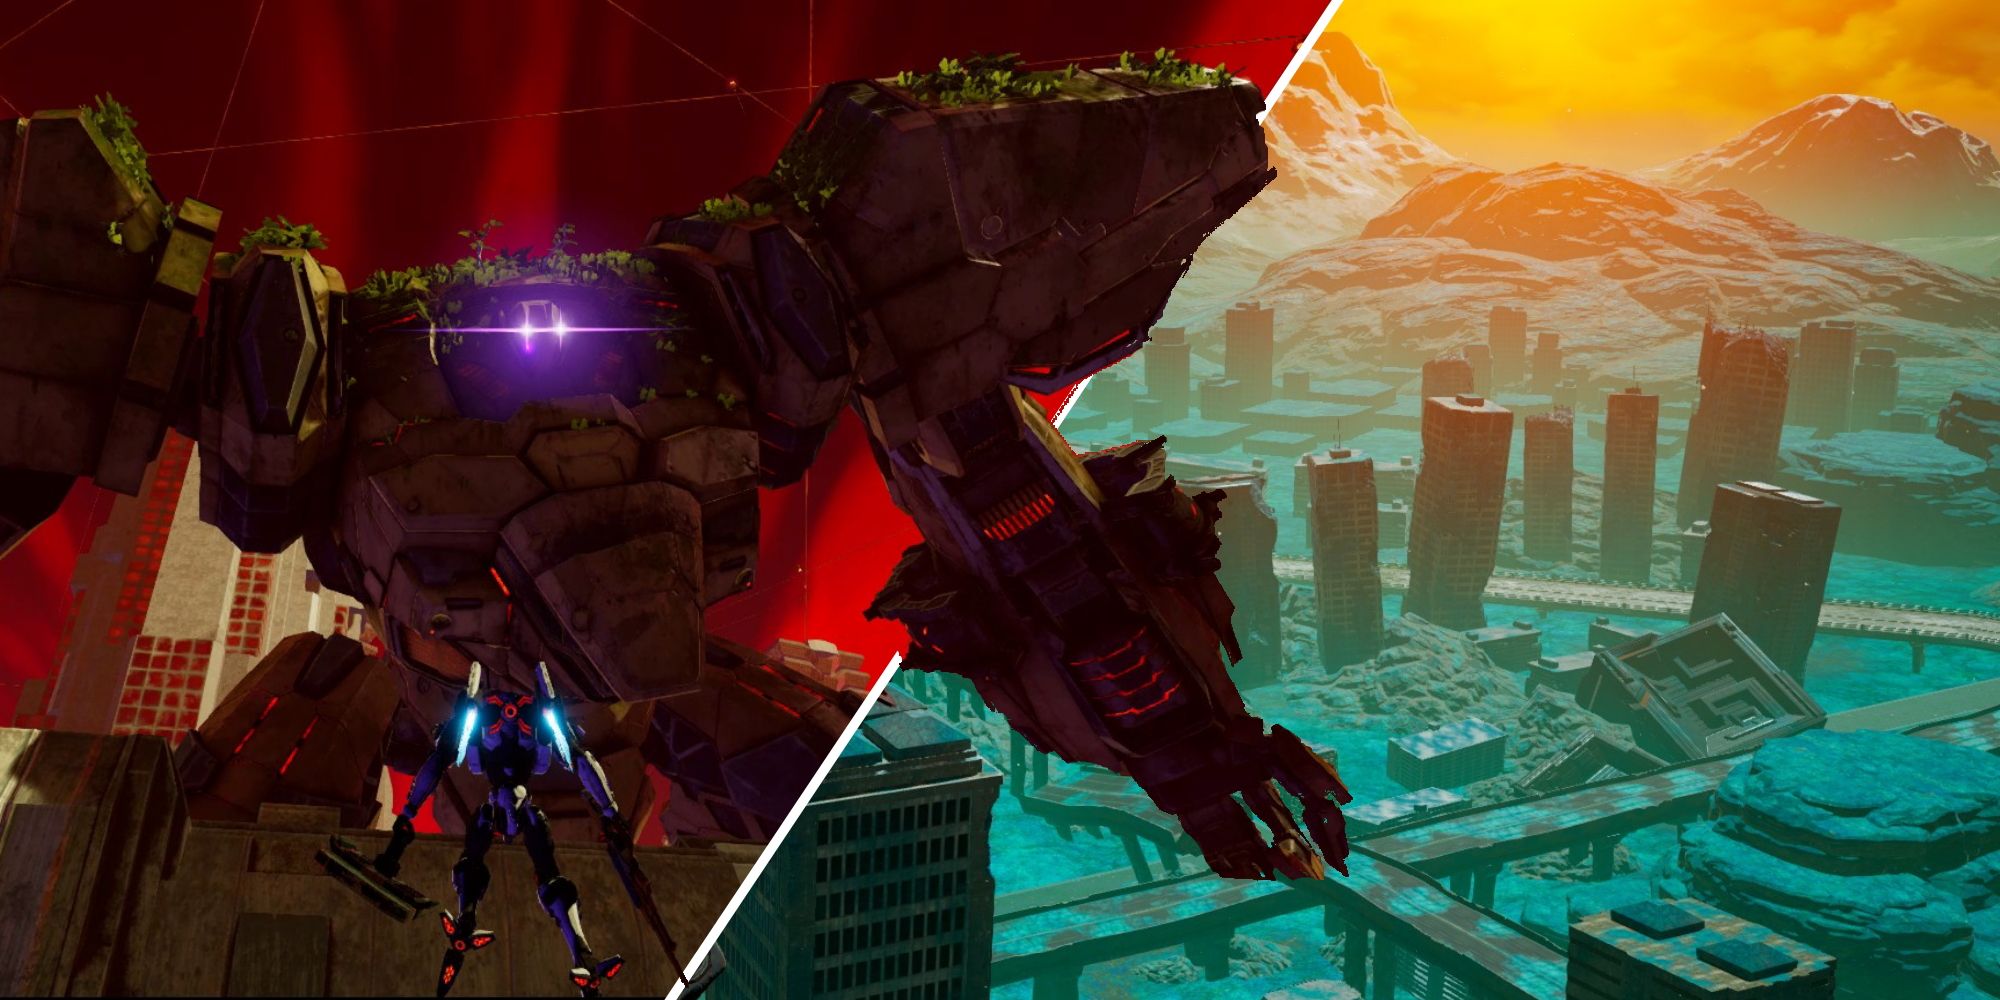 Daemon X Machina Featured Image (showing a Arsenal facing off against an Immortal, with a split image showing another location for color contrast)